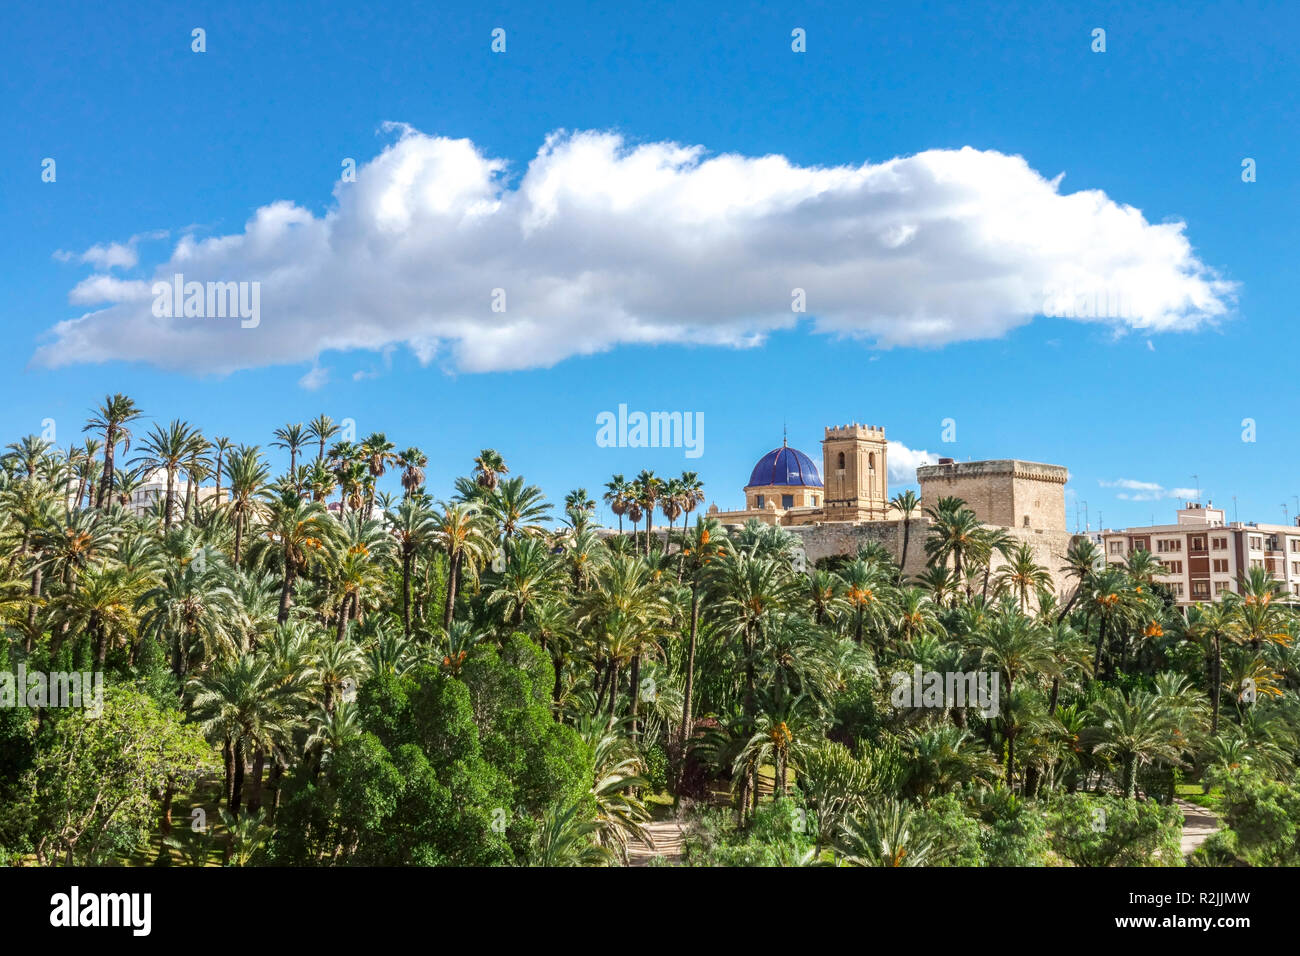 Elche Spain Europe Valencia region UNESCO world heritage site, Elche Palm grove countryside and cloud view Stock Photo